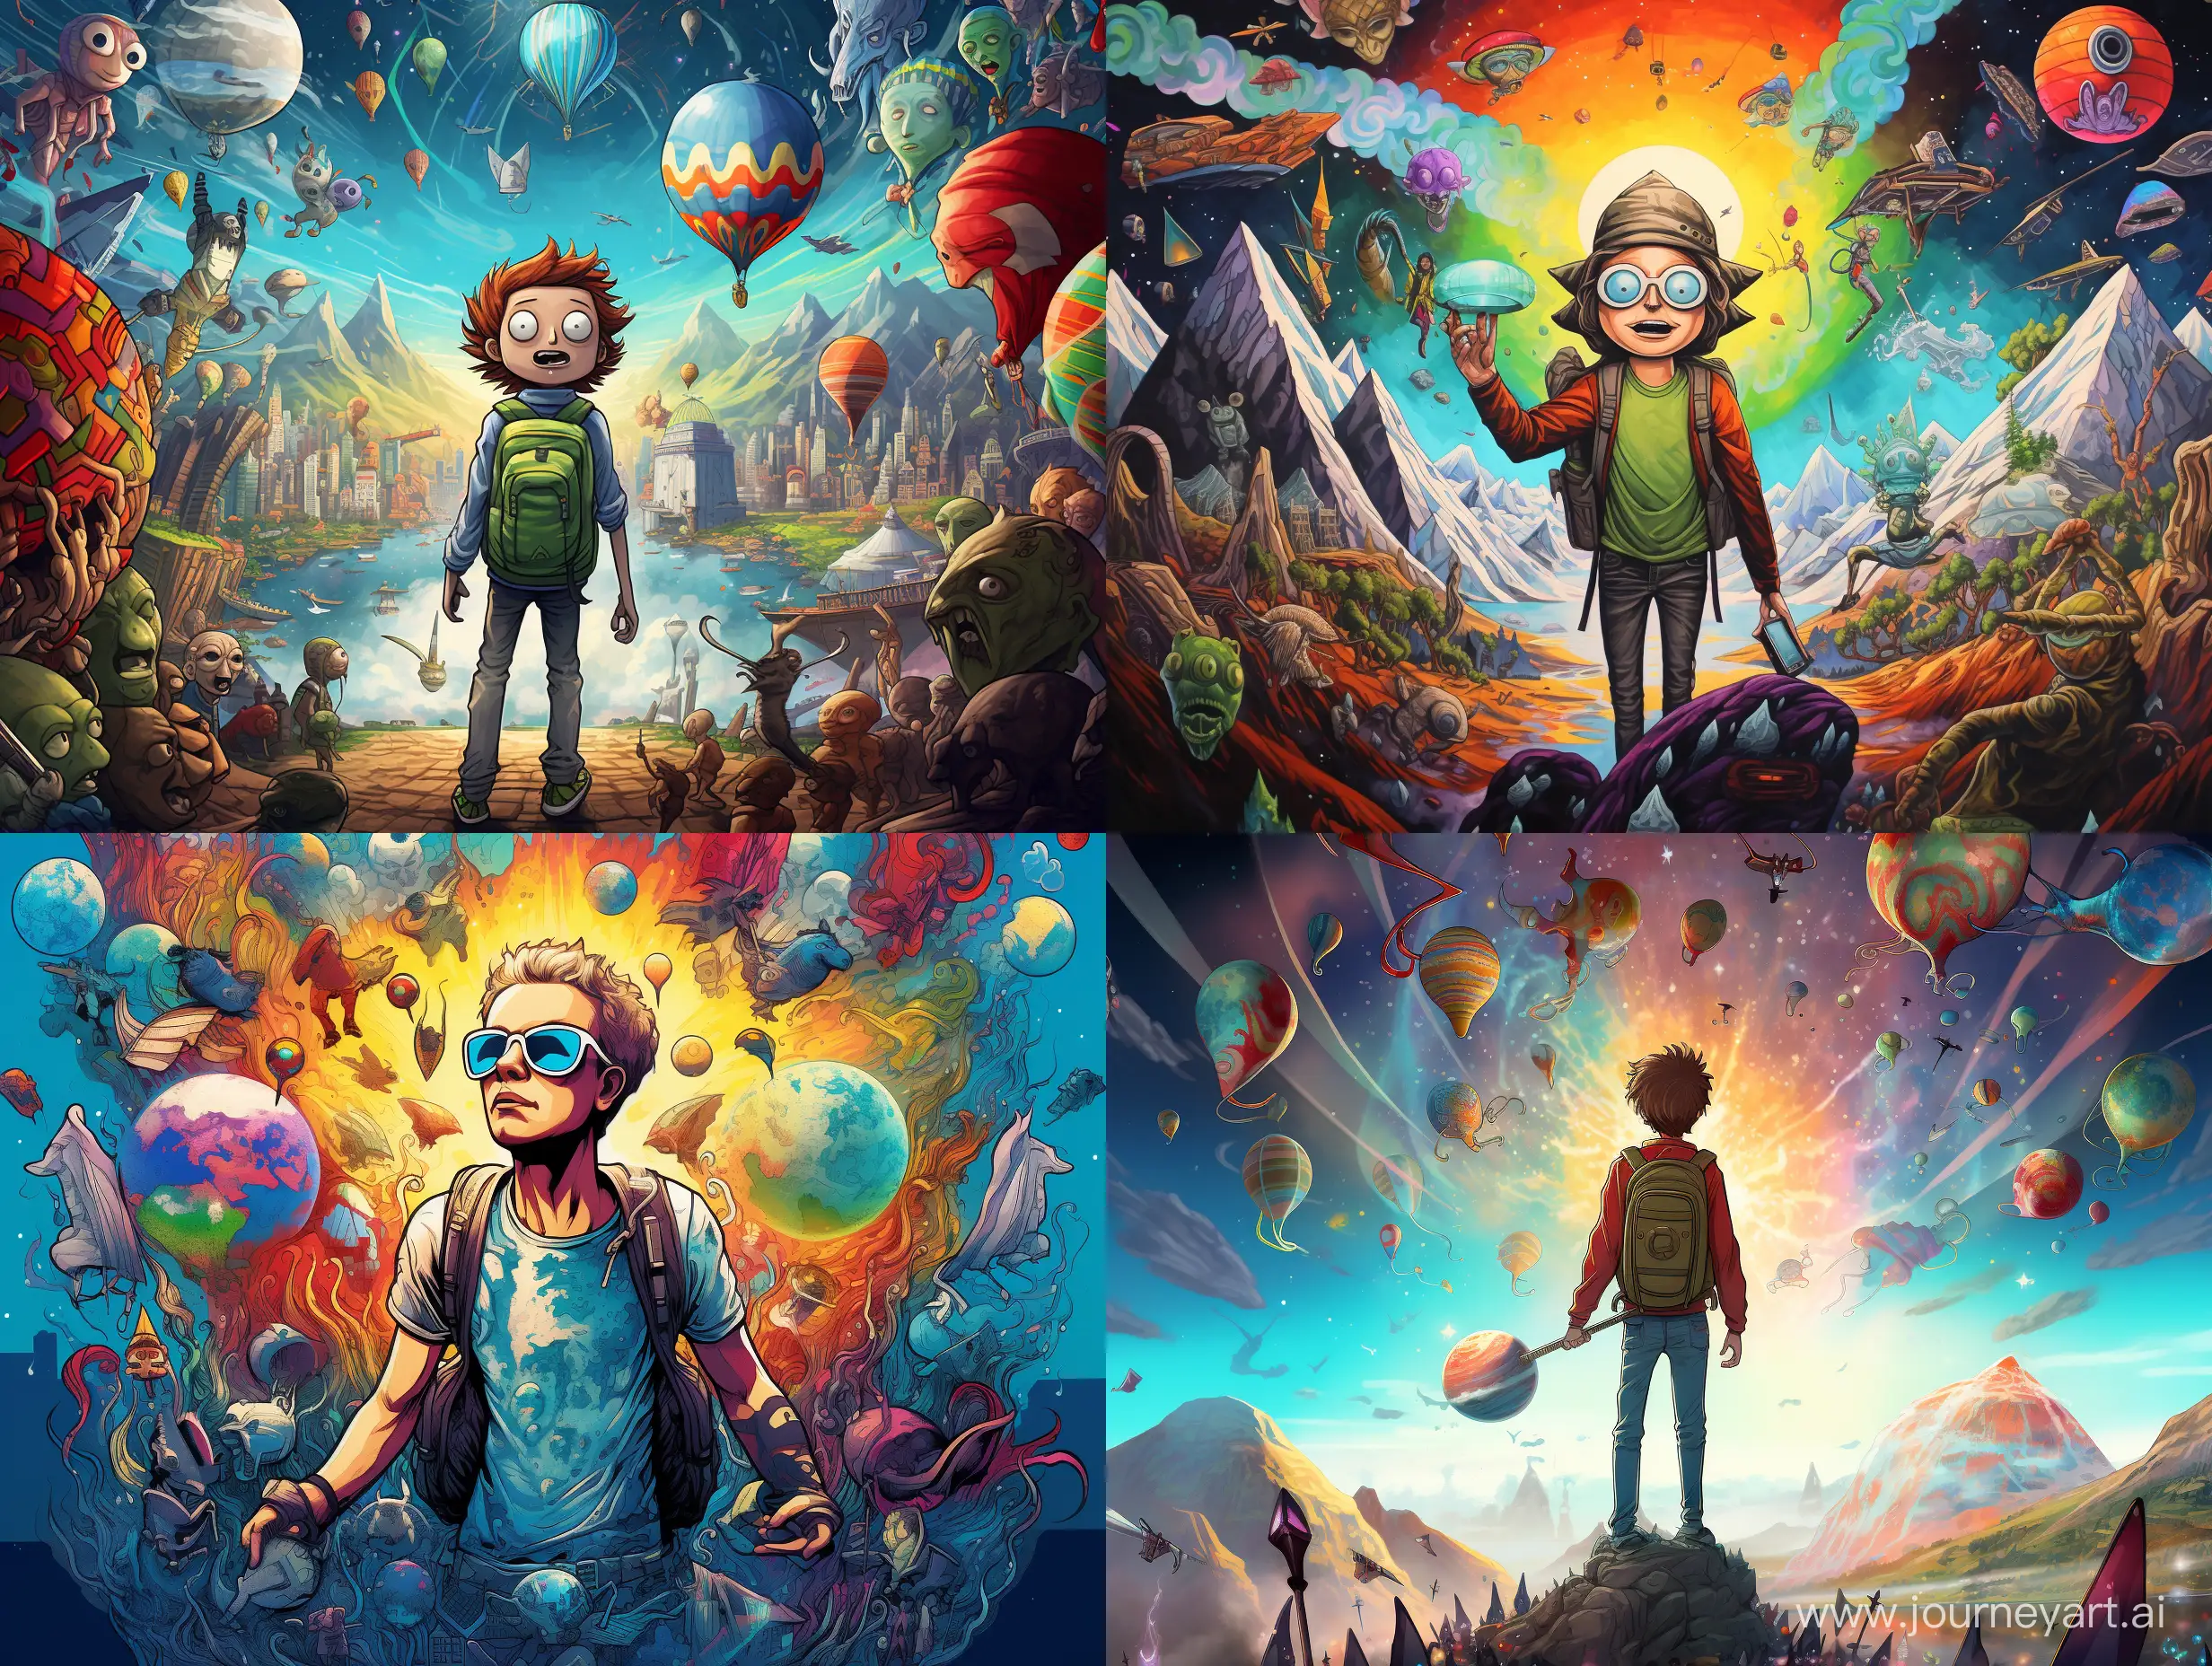 The image depicts a traveler in the style of Rick and Morty, standing against the backdrop of various countries. The traveler is portrayed in full height, giving prominence to their presence. The scene is captured in a photograph, exhibiting exceptional clarity and detail. The traveler's appearance is resplendent, exuding a sense of adventure and curiosity. Vibrant colors and intricate designs adorn their clothing, reflecting the flamboyant and eccentric nature of the show. The breathtaking scenery, showcased through expert composition and use of an aspect ratio of 9:16, transports viewers into a mesmerizing world of exploration and wonders.